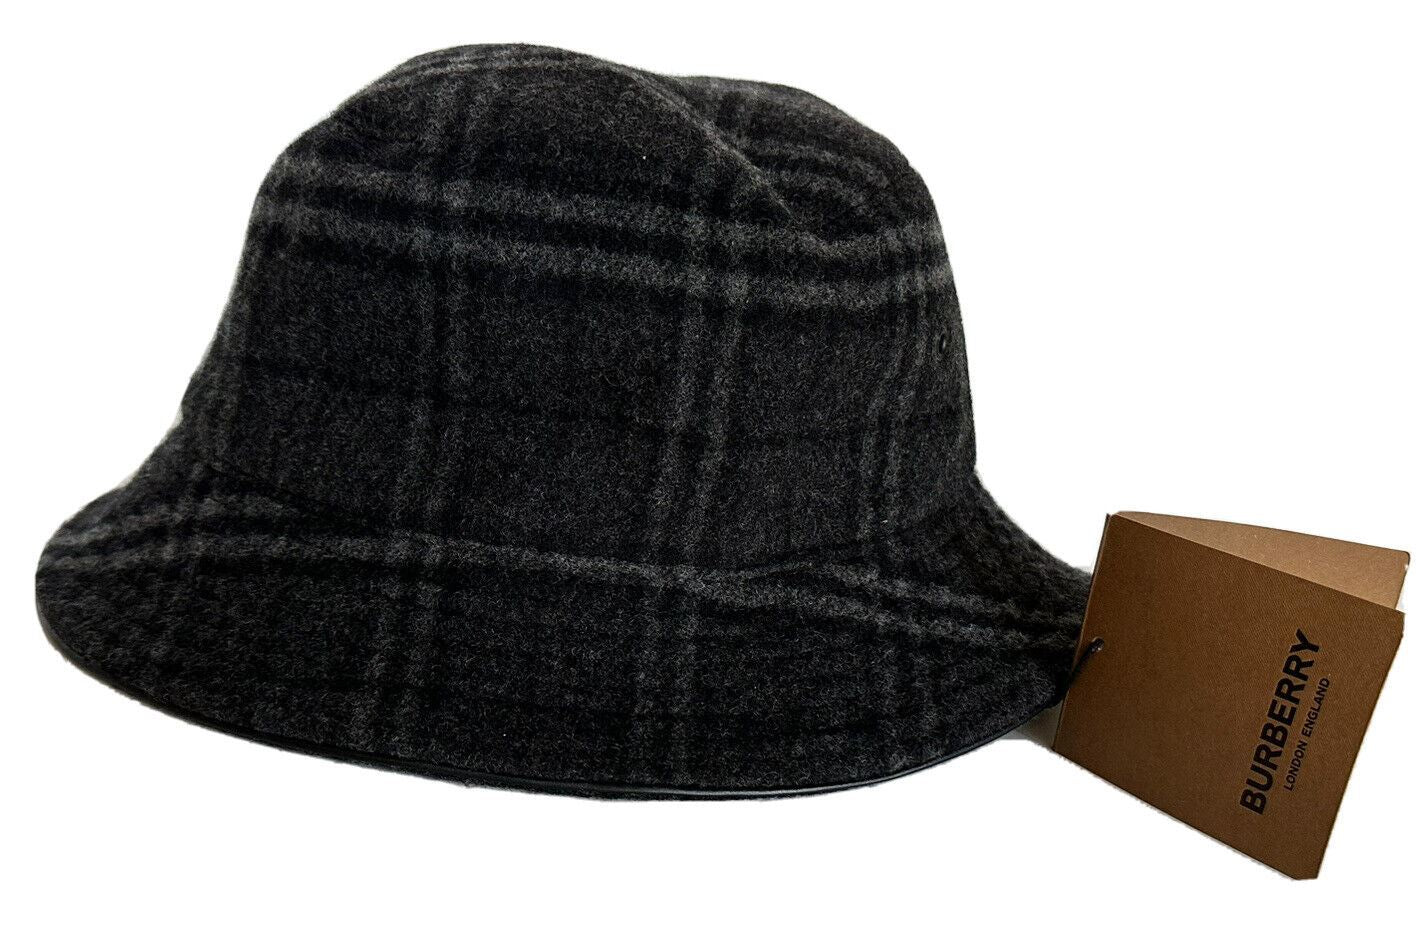 NWT $530 Burberry Check Bucket Hat Wool/Cashmere Black M (57 Euro) 8044077 Italy